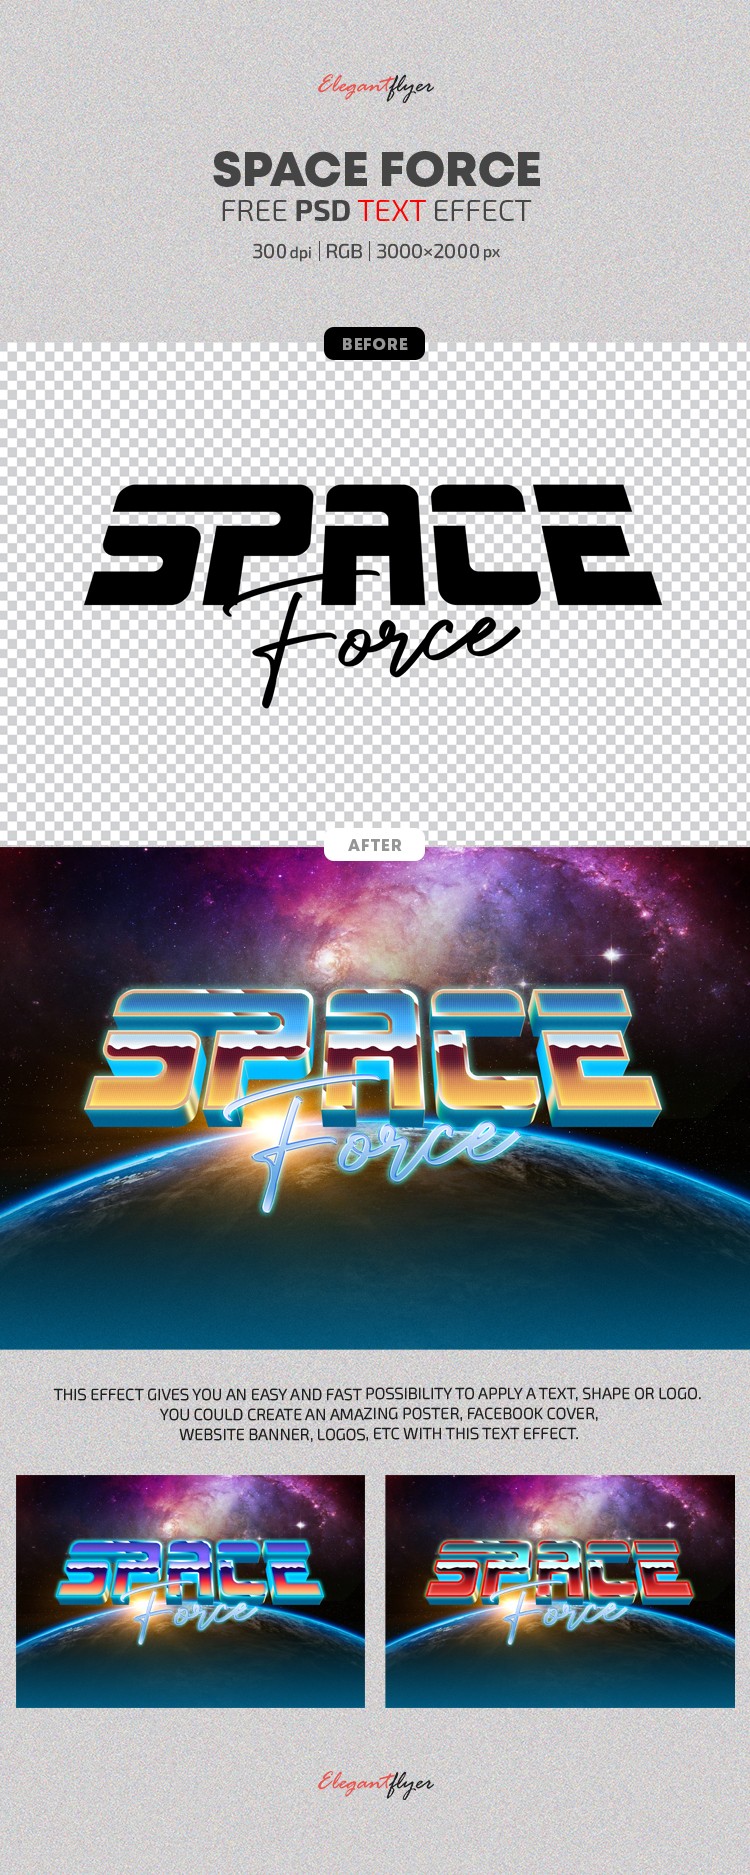 Space Force Text Effect by ElegantFlyer